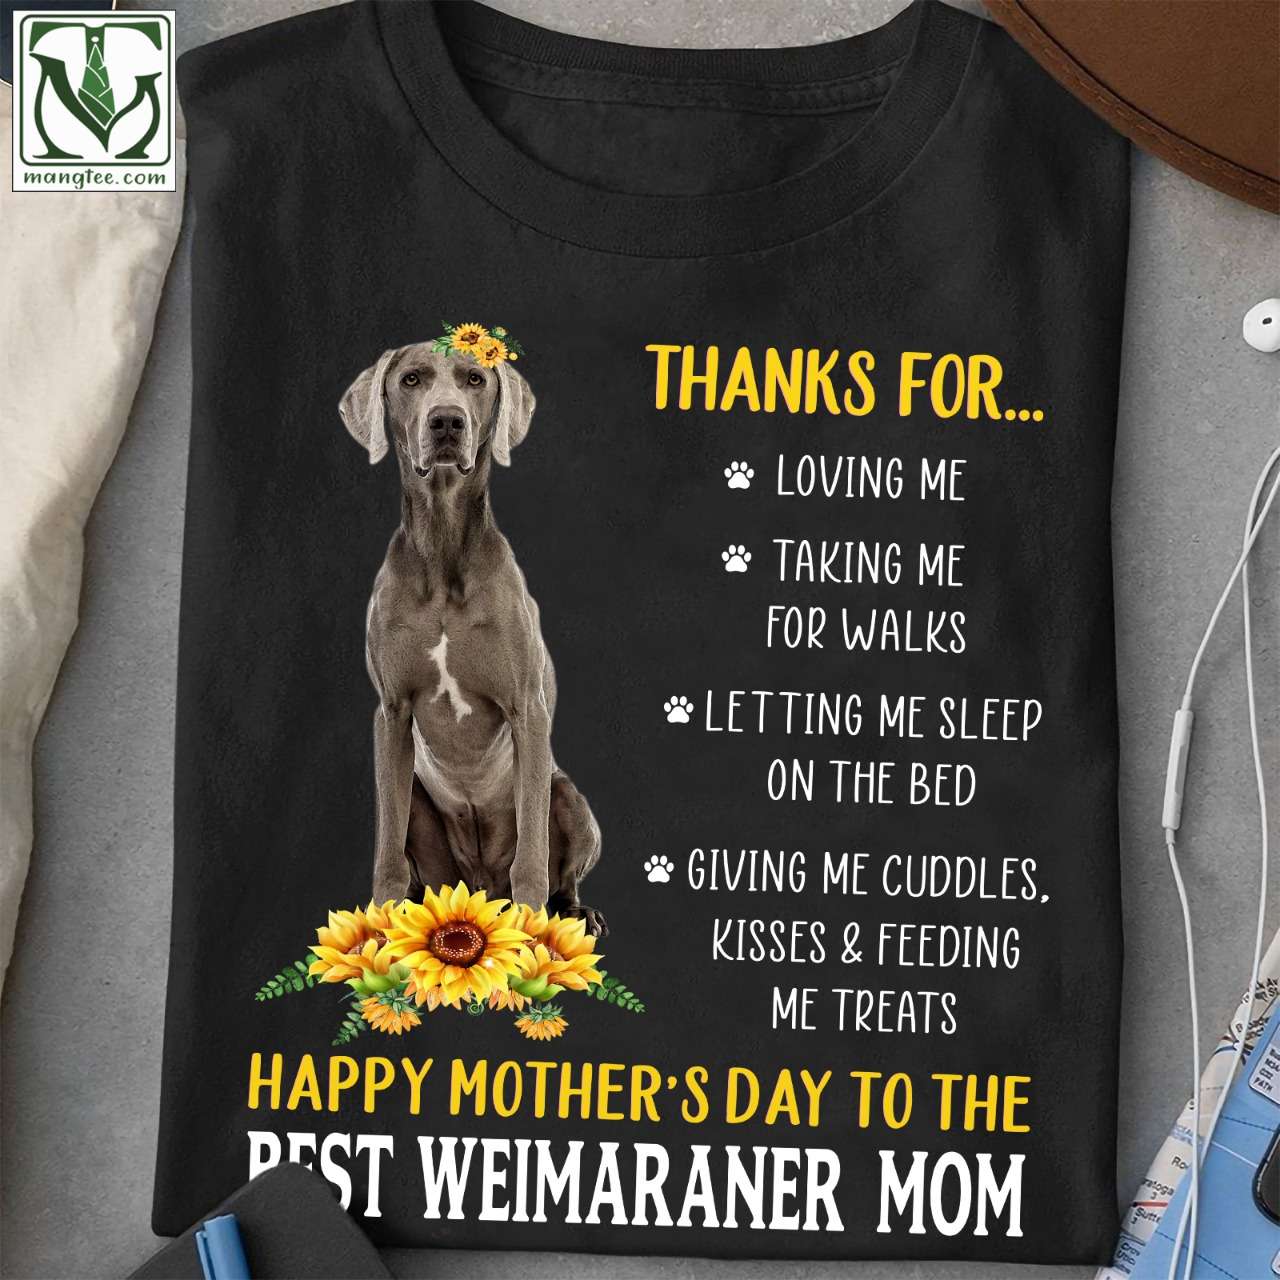 Weimaraner Mom - Thanks for loving me taking me for walks happy mother's day to the best weimaraner mom